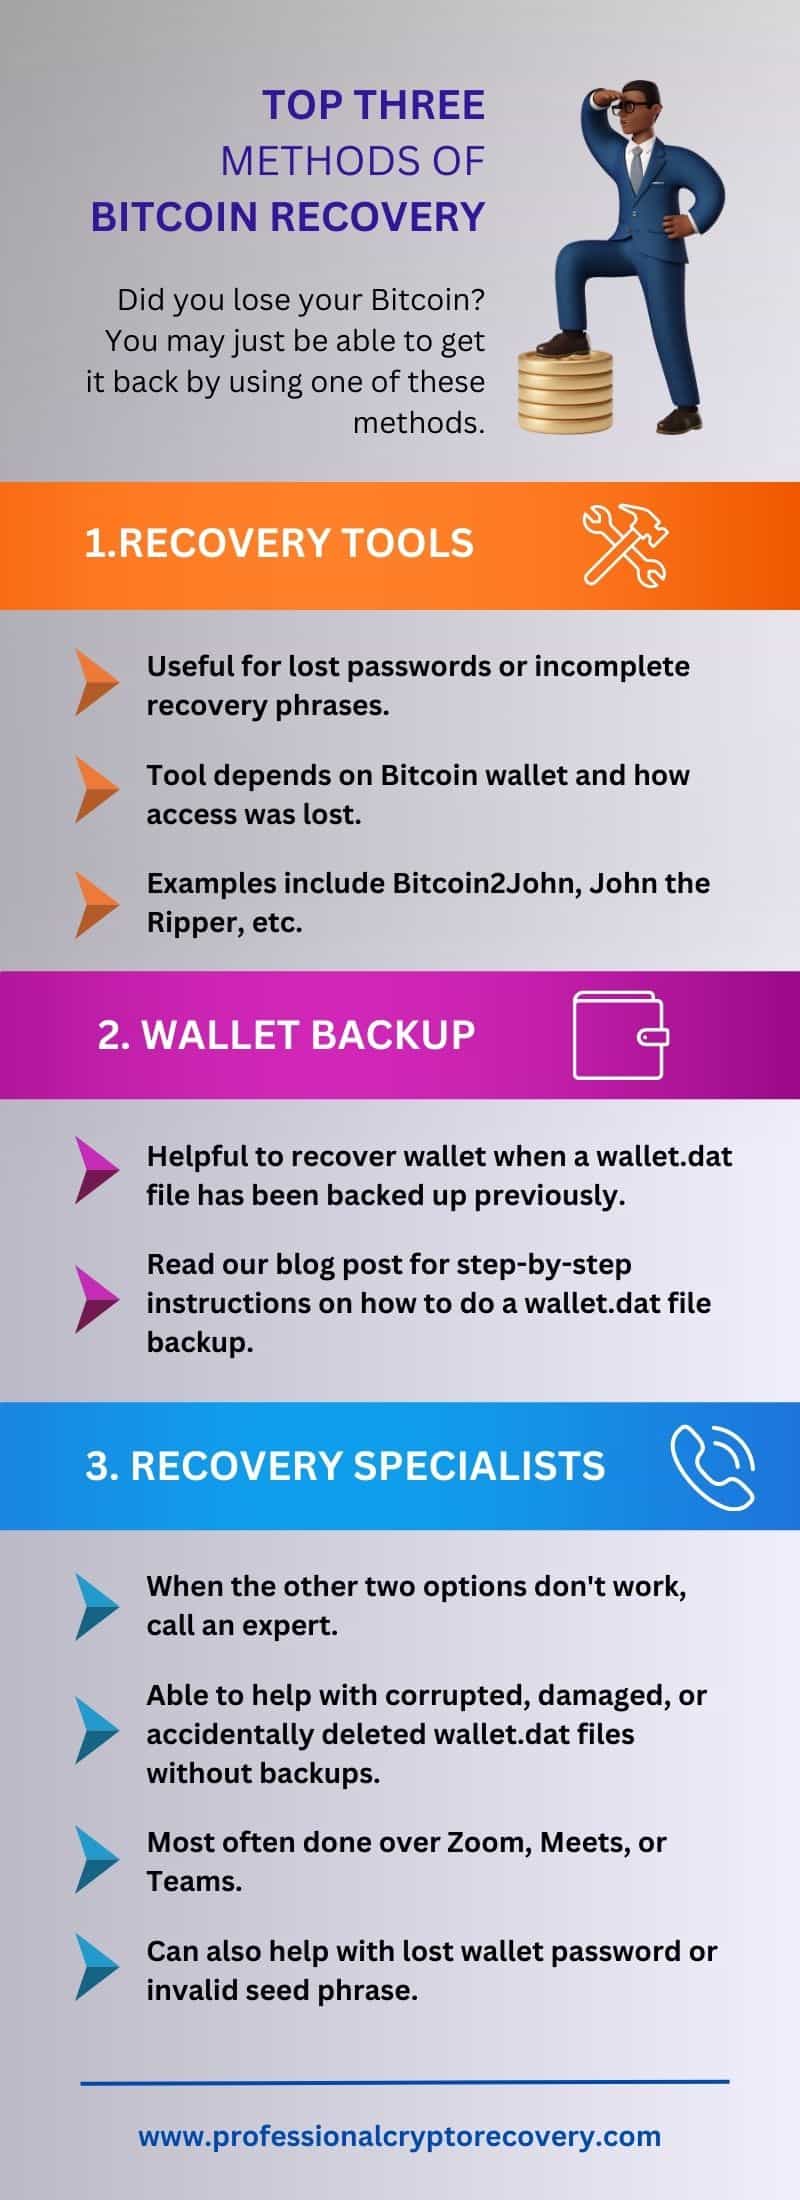 Top Three Methods of Bitcoin Recovery